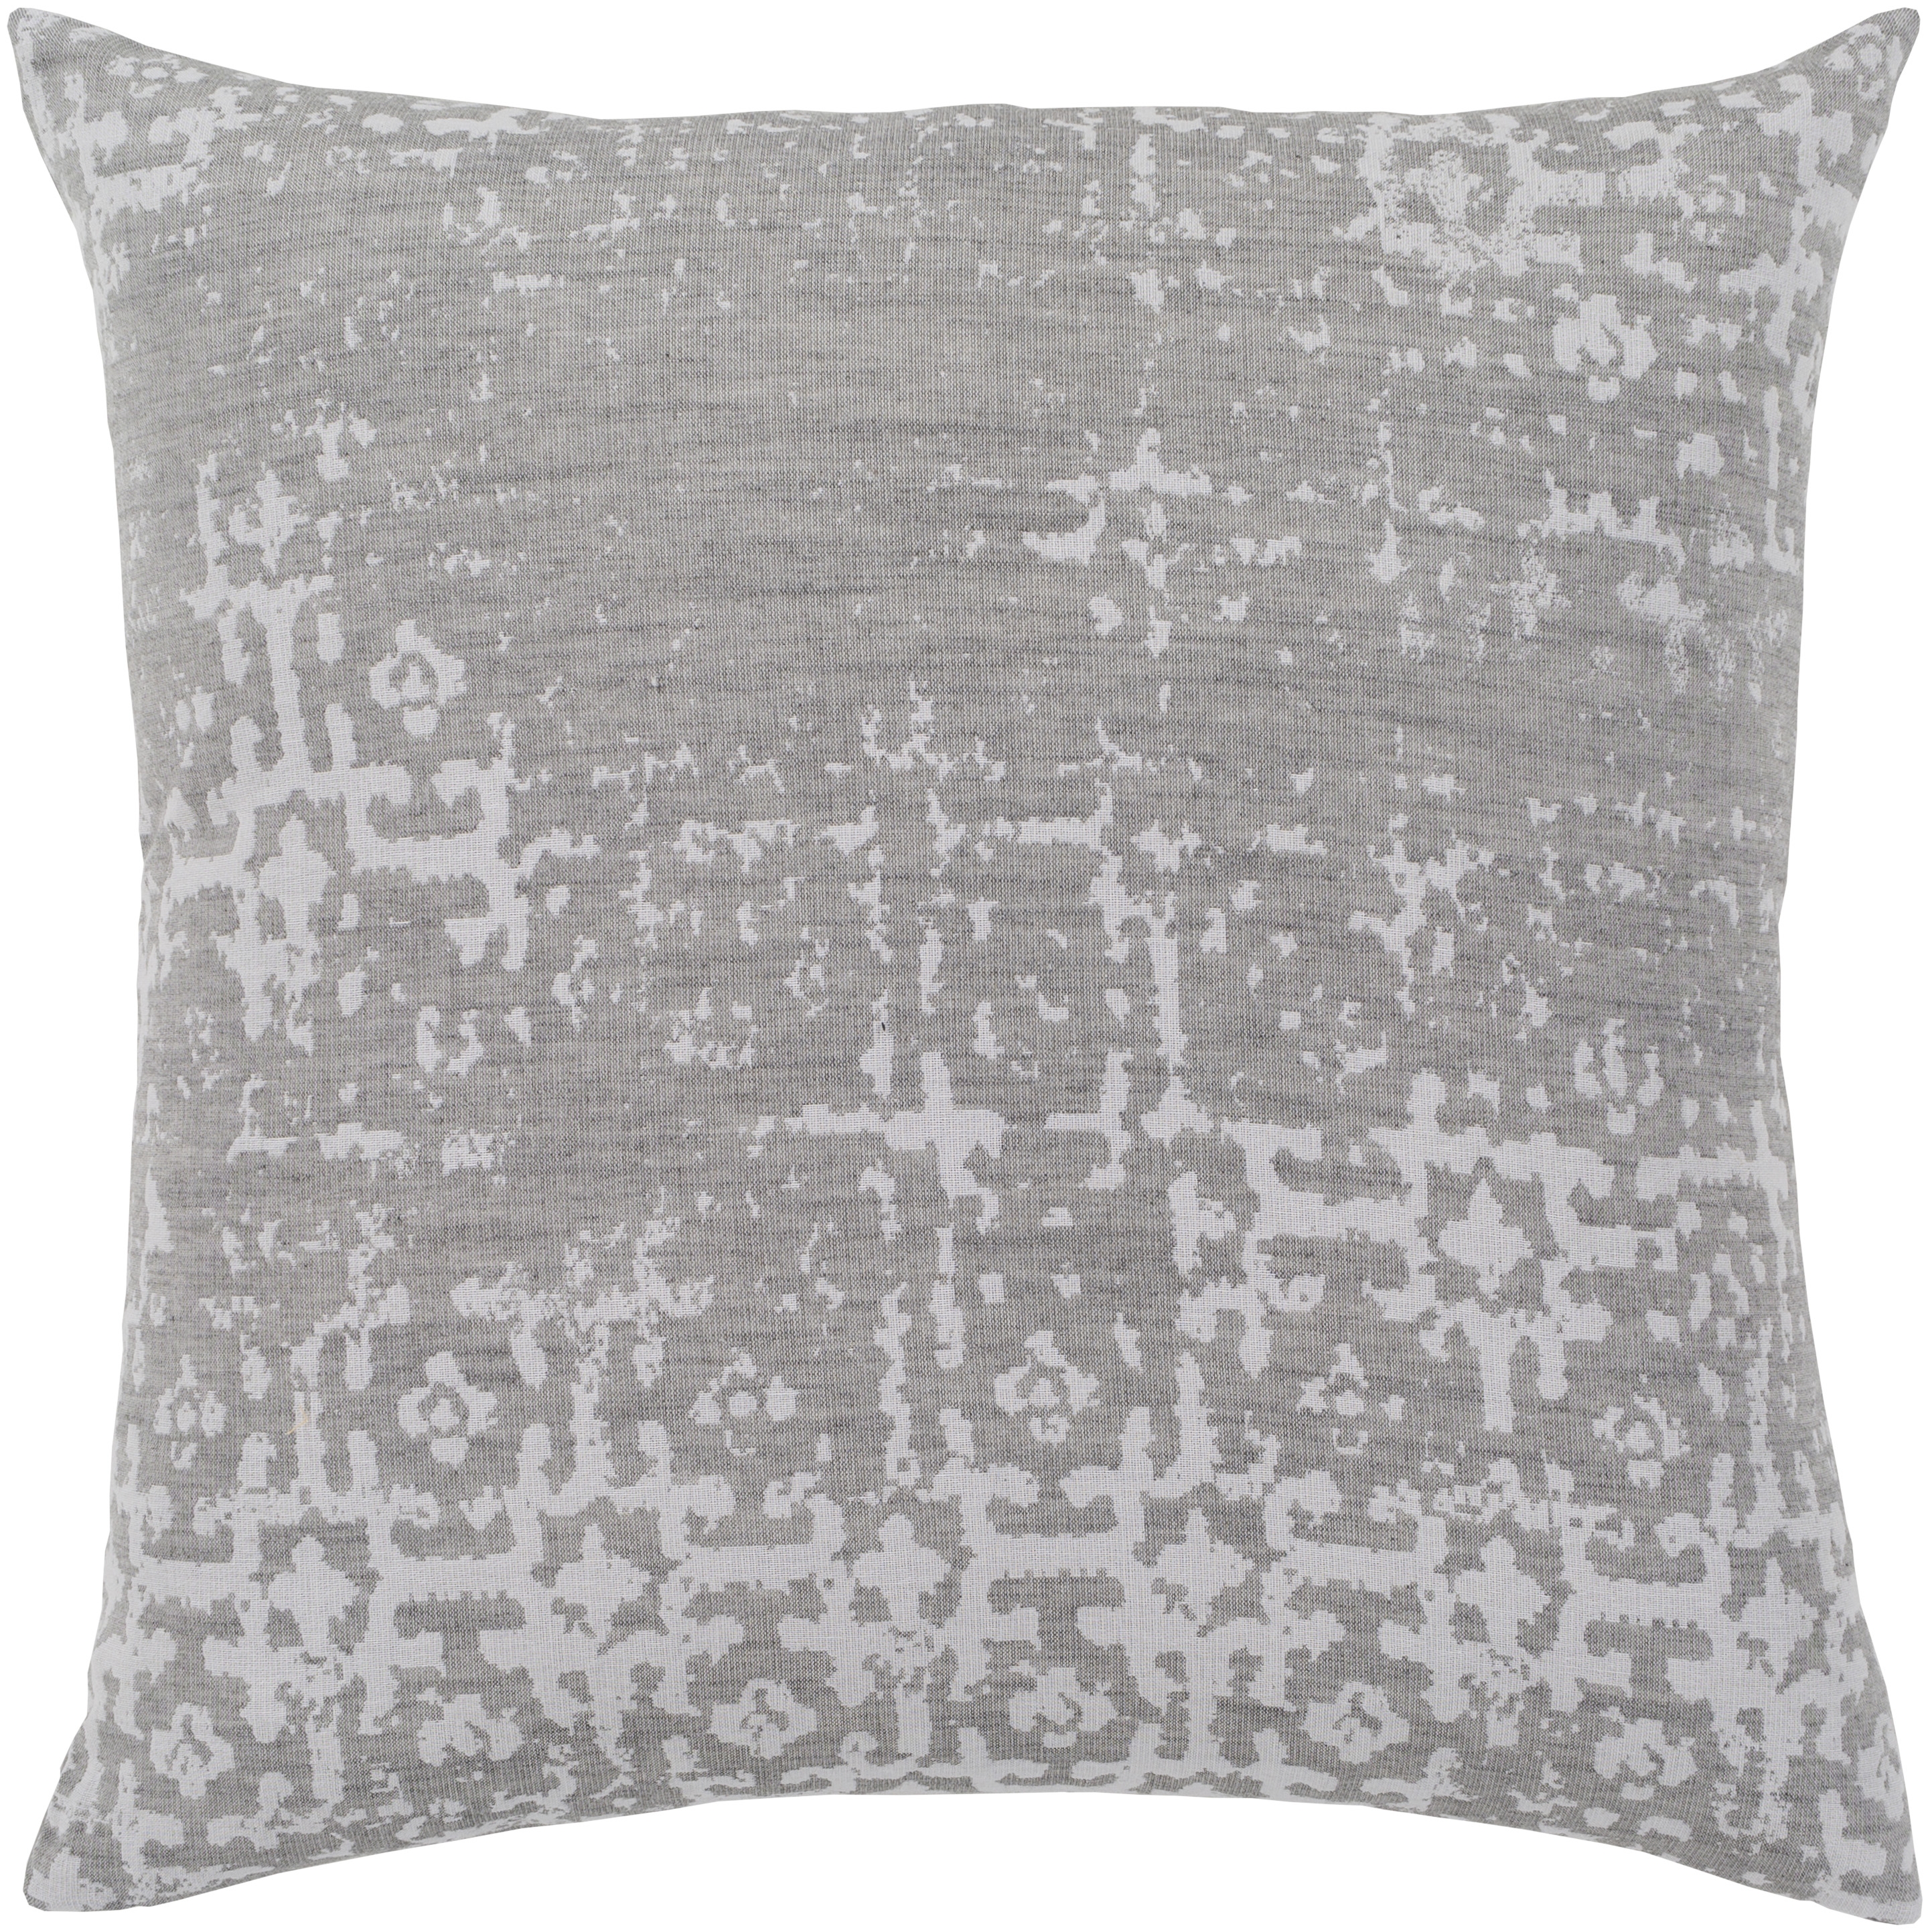 Abstraction Throw Pillow, 18" x 18", pillow cover only - Image 0